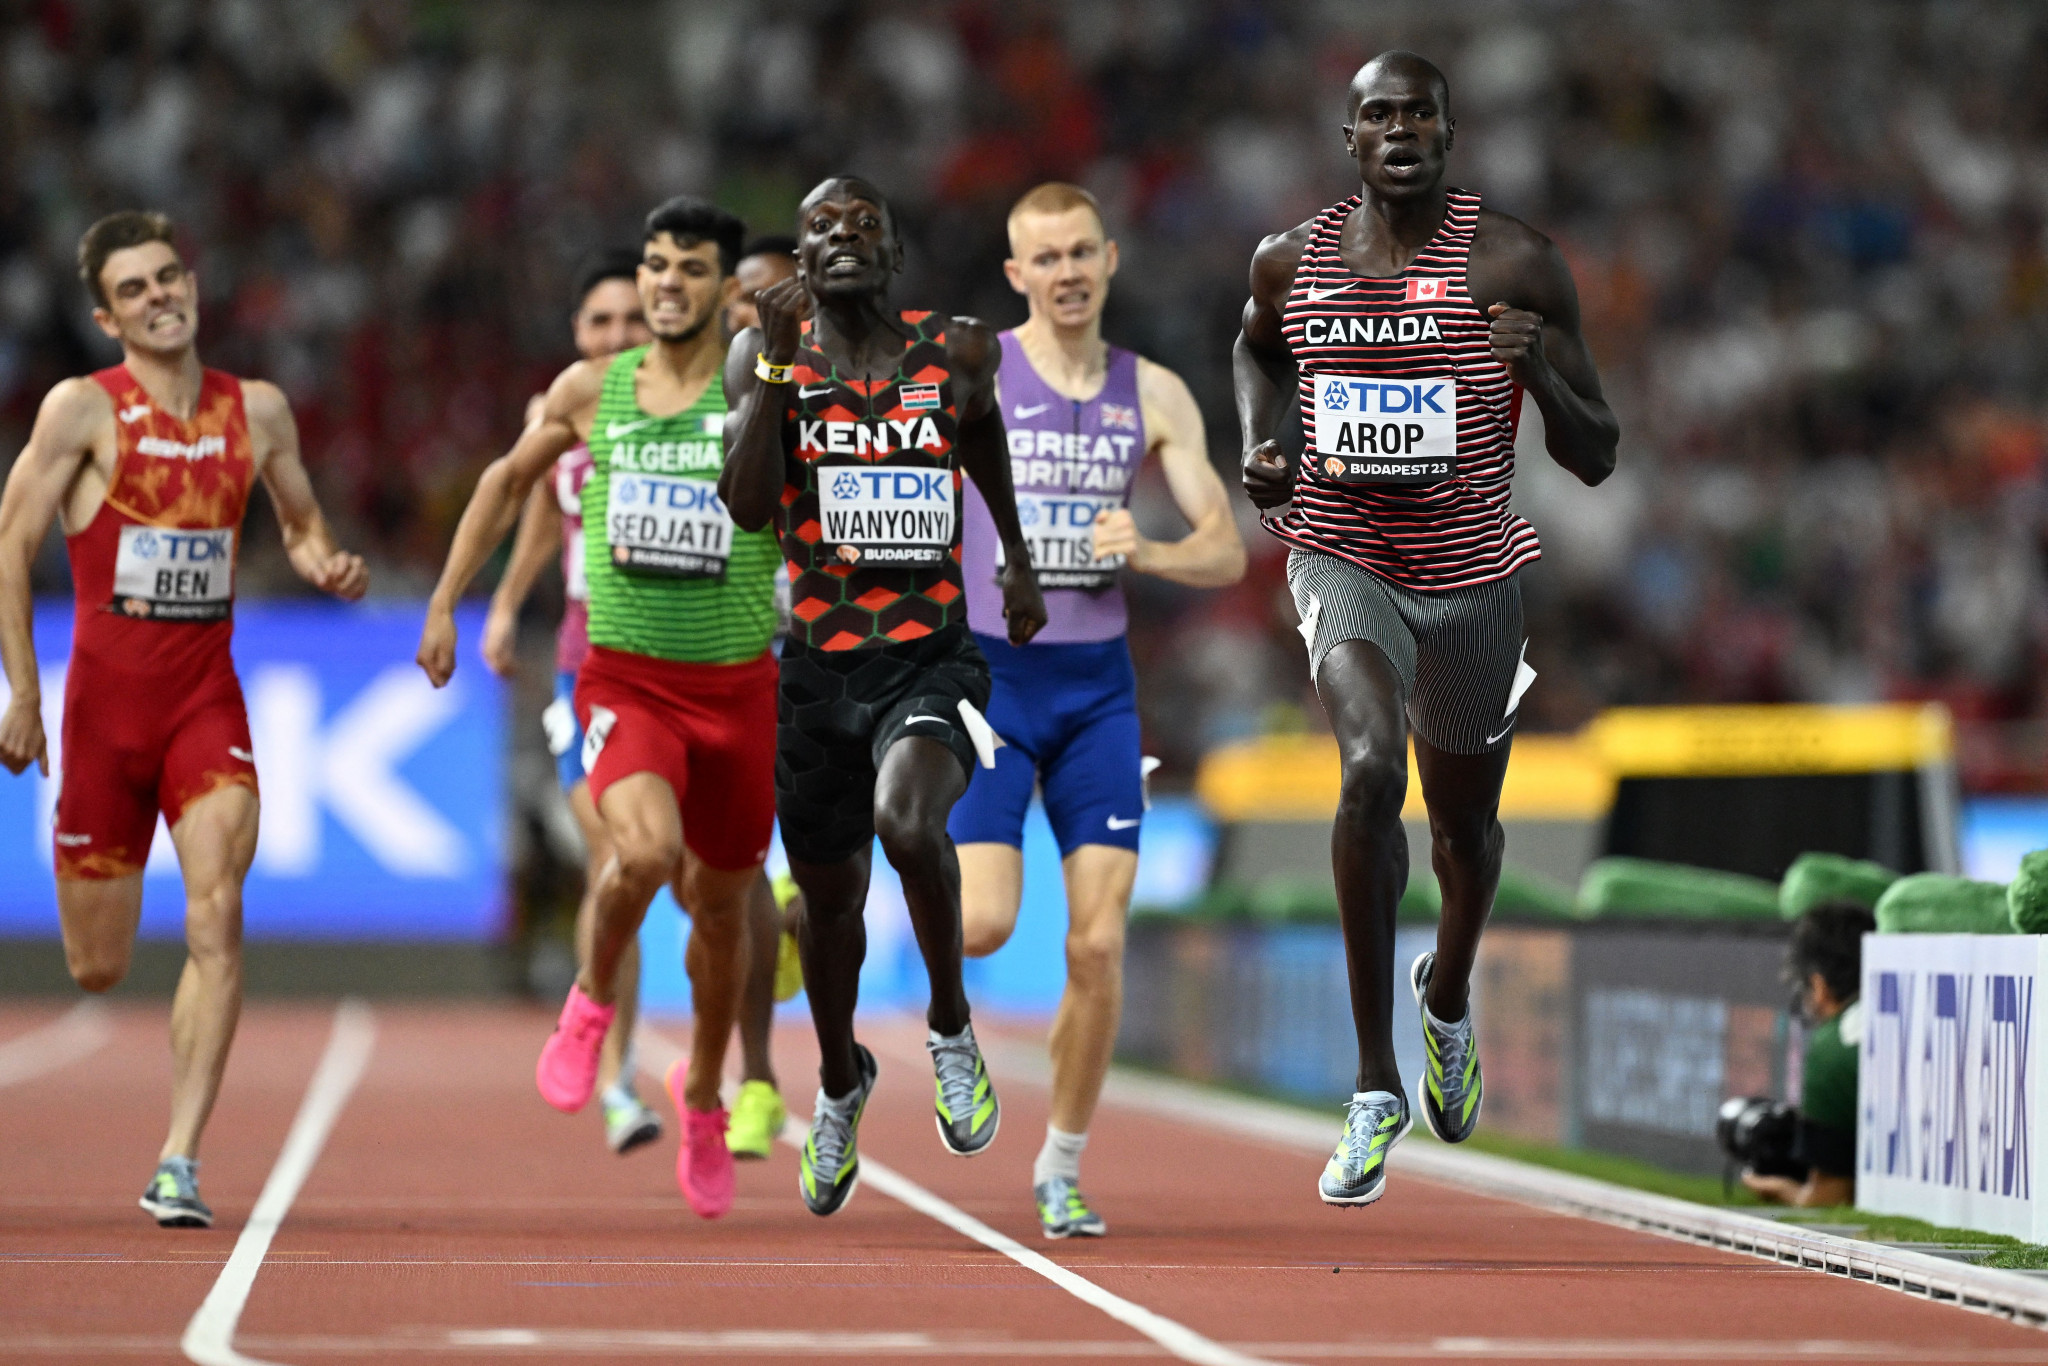 Canada's Marco Arop, right, triumphed in the men's 800m final to upgrade his bronze from last year ©Getty Images